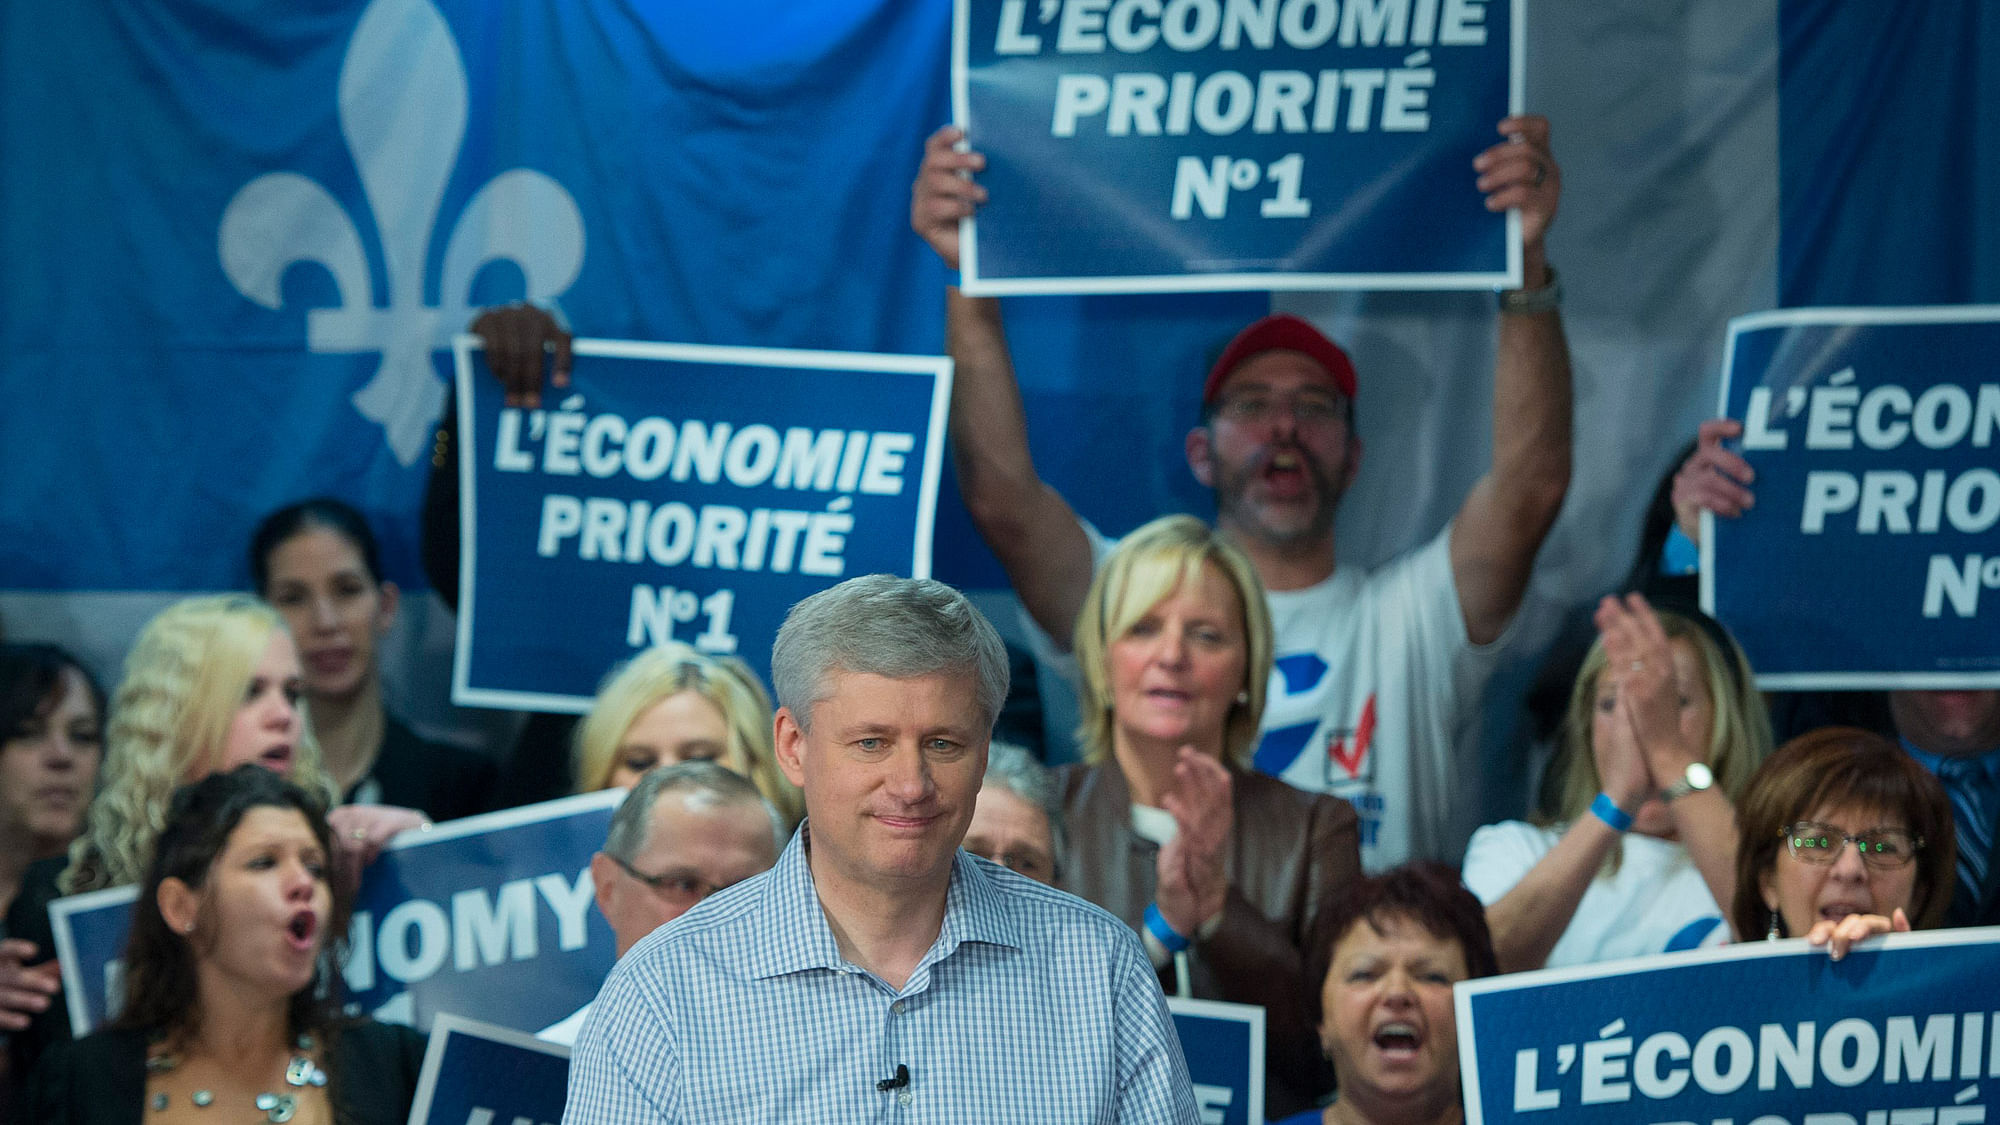 Conservative leader Stephen Harper attends a campaign event in Trois-Rivieres, Quebec, Canada on Thursday, 15 October 2015. (Photo: AP)